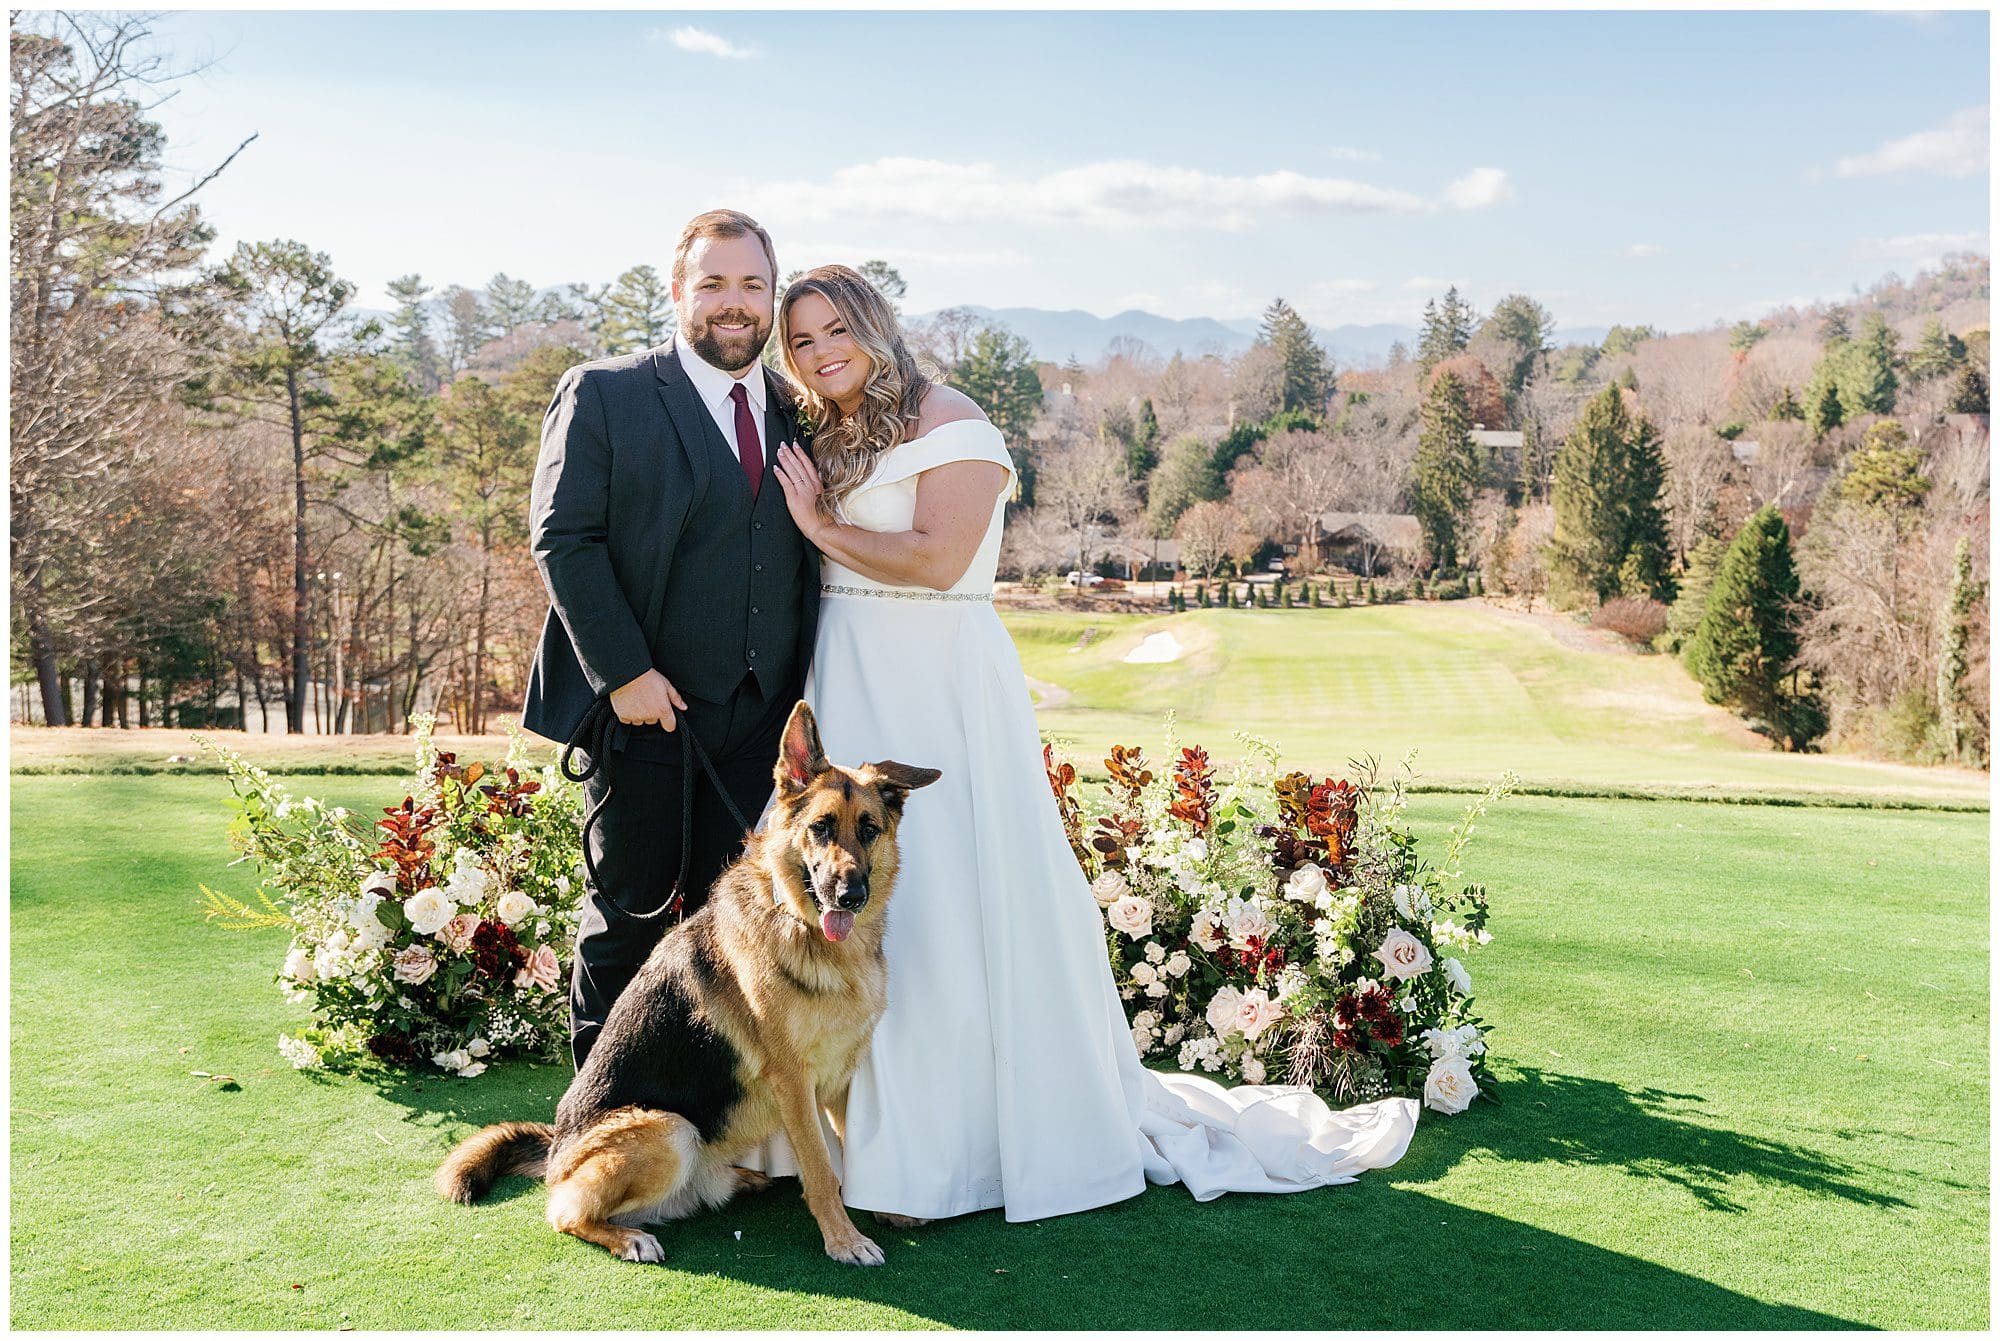 A bride and groom posing with their dog on the golf course.